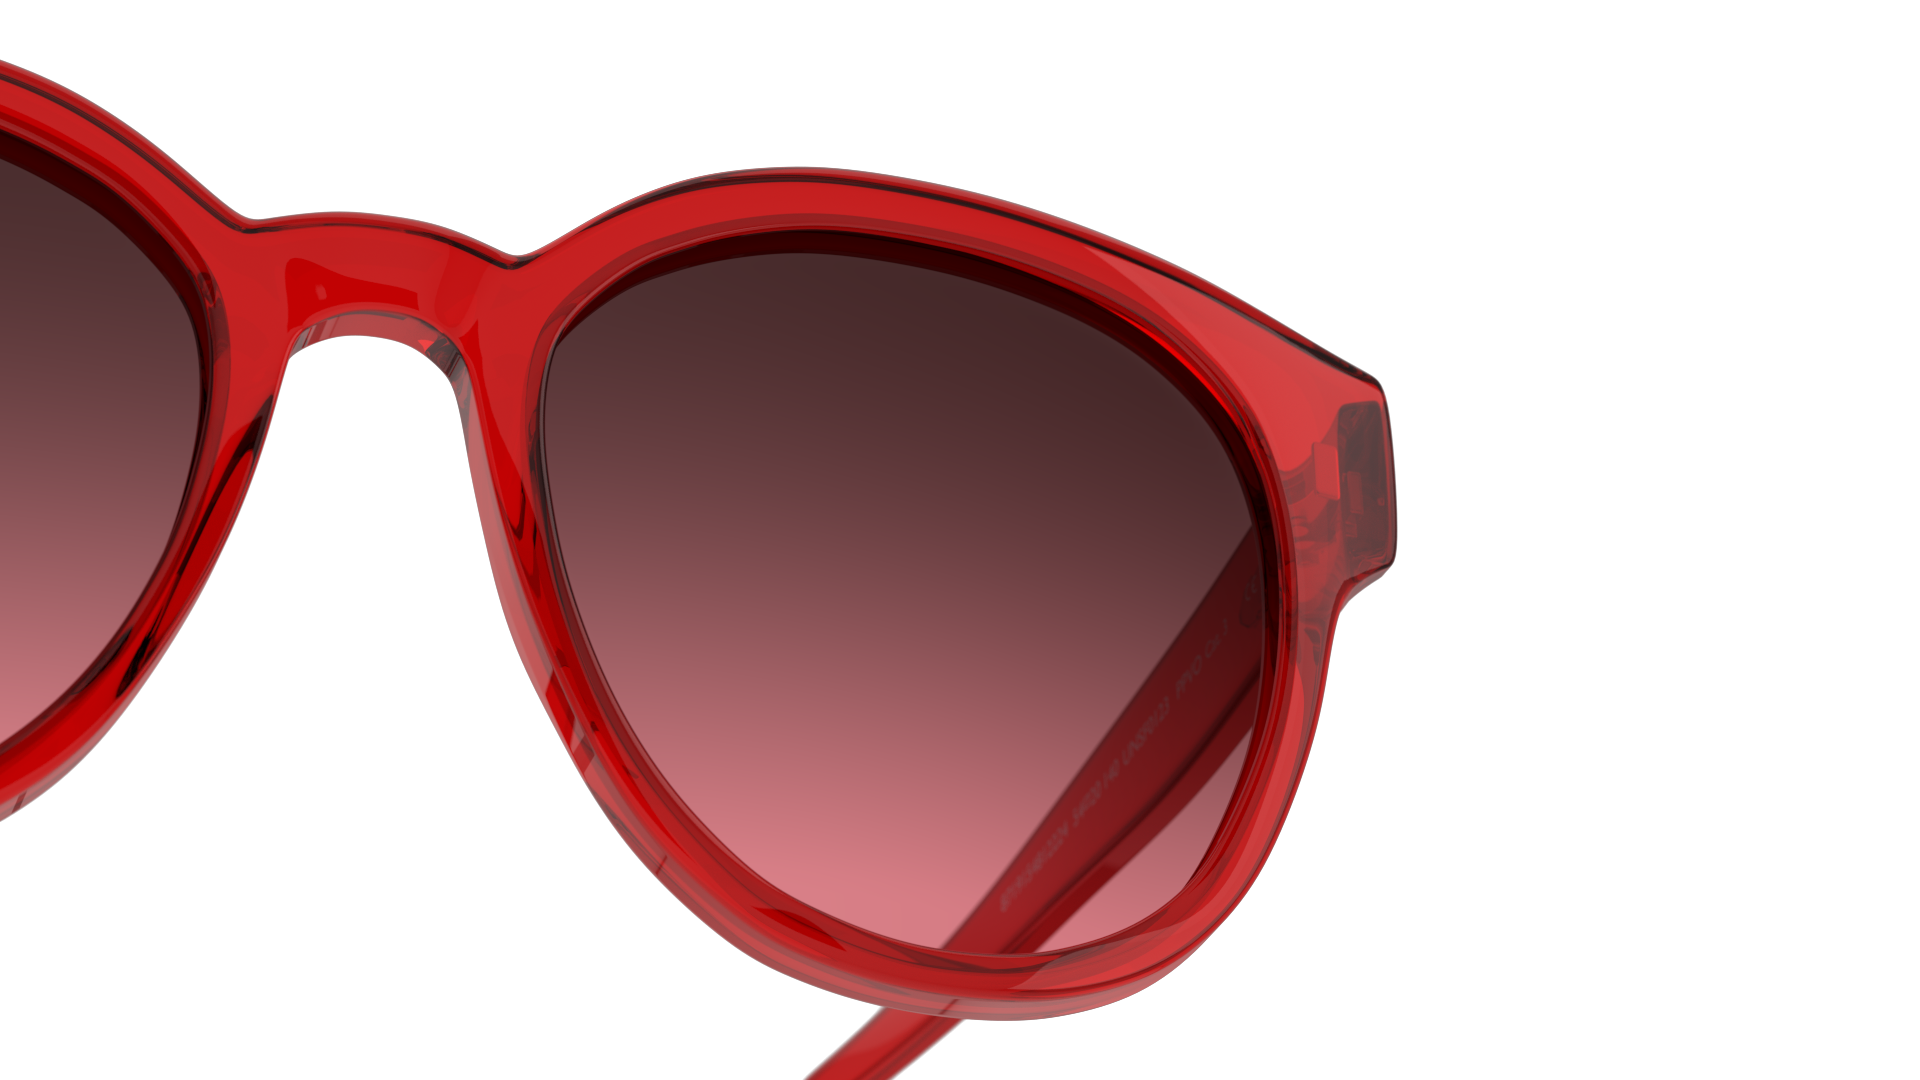 Detail01 Unofficial UNSF0123 (PPV0) Sunglasses Violet / Transparent, Red